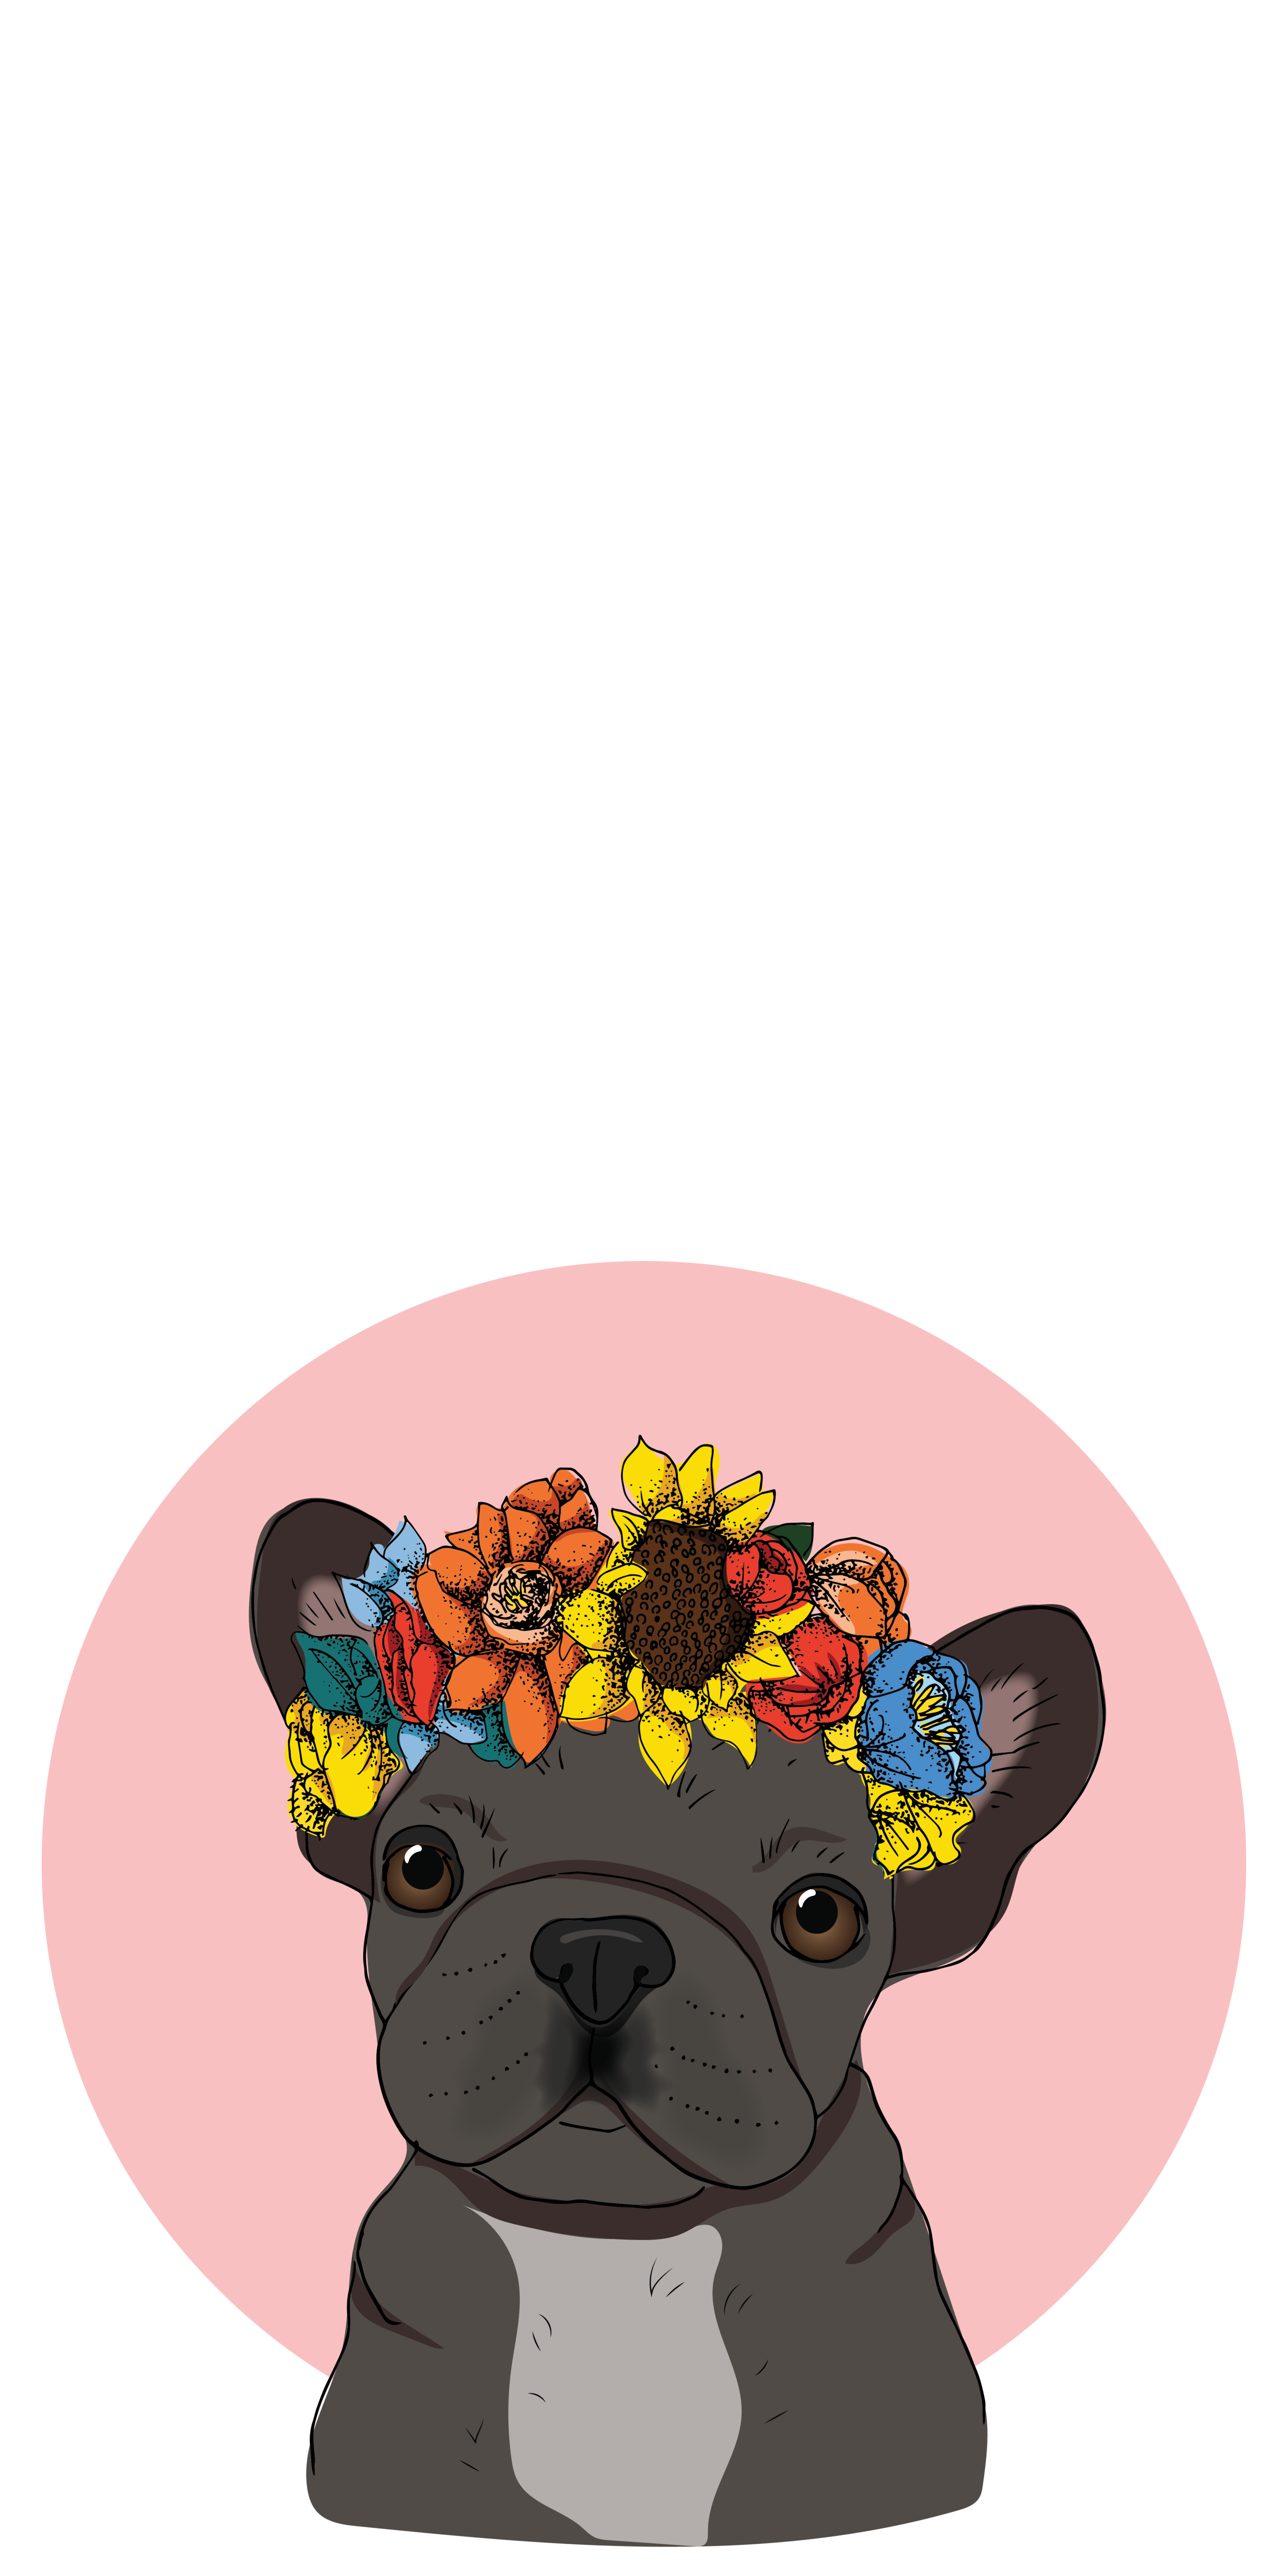 French #Bulldog with #Floral #Crown. #Casetify #iPhone #Art